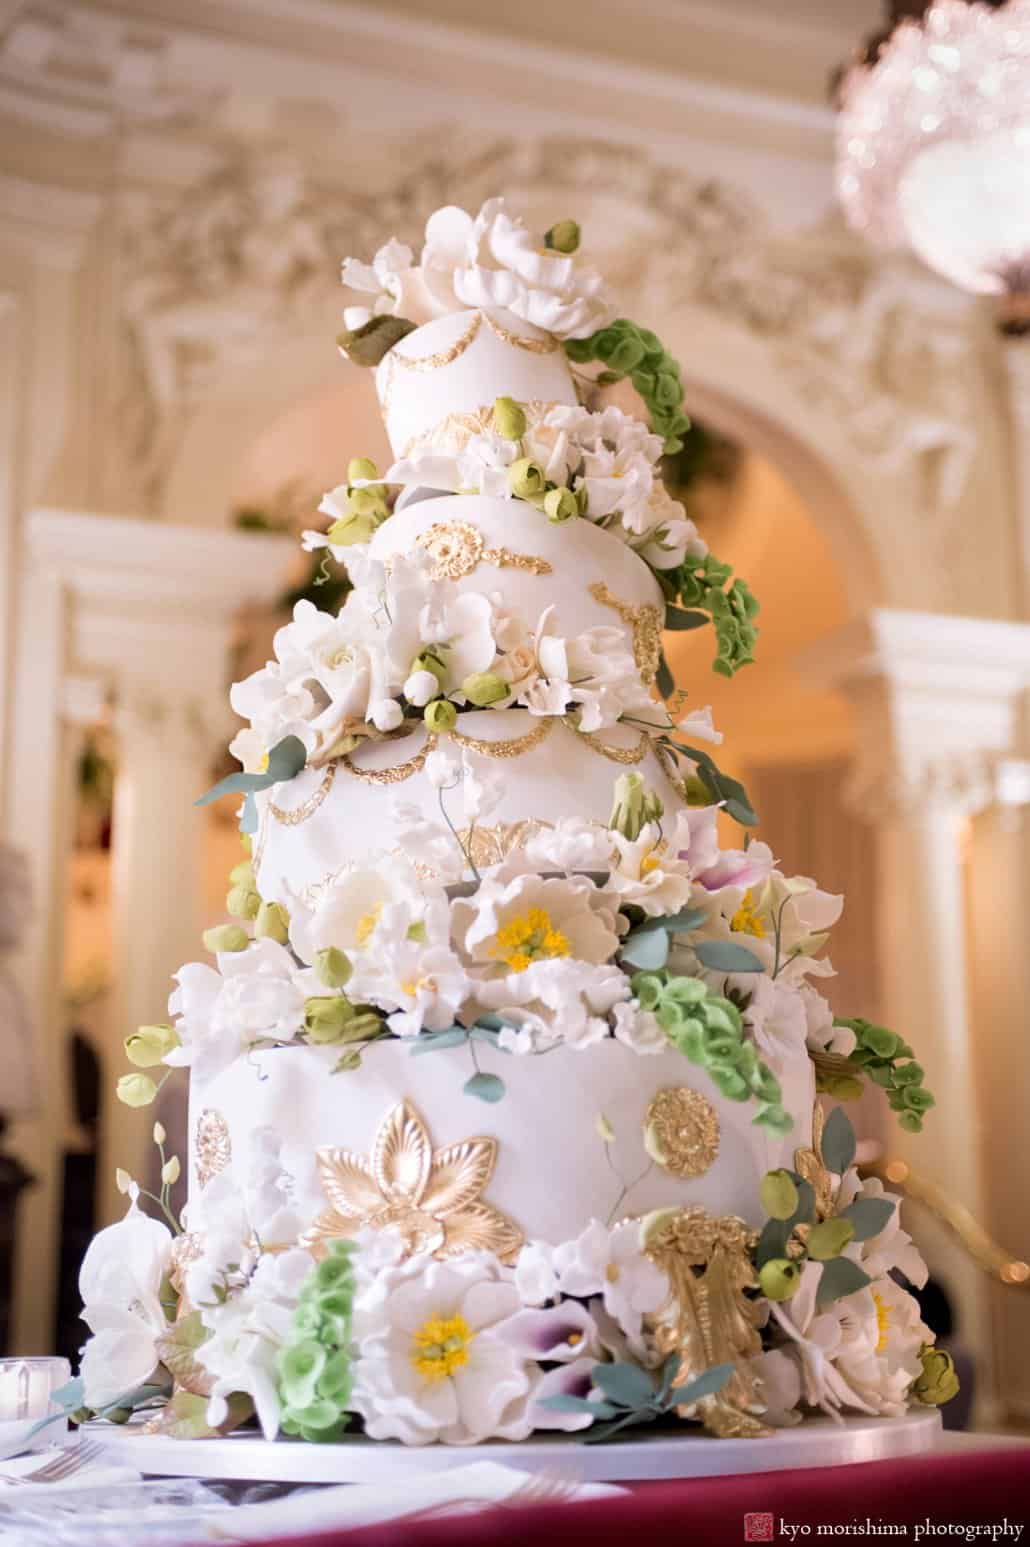 Ron Ben-Israel asymmetrical wedding cake with white flowers and gold embellishments at Lotos Club wedding in NYC, photographed by Kyo Morishima